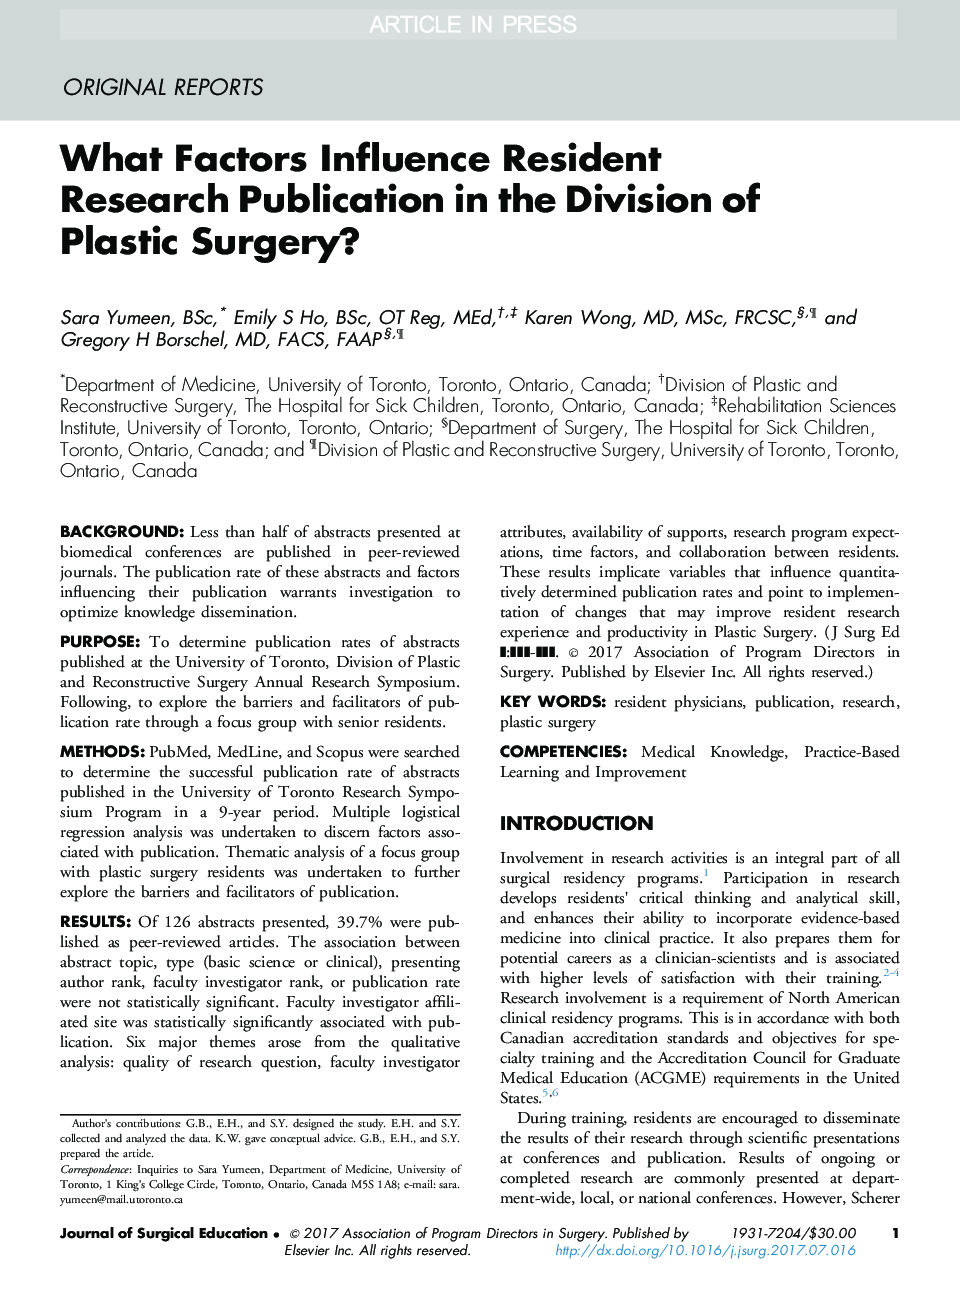 What Factors Influence Resident Research Publication in the Division of Plastic Surgery?